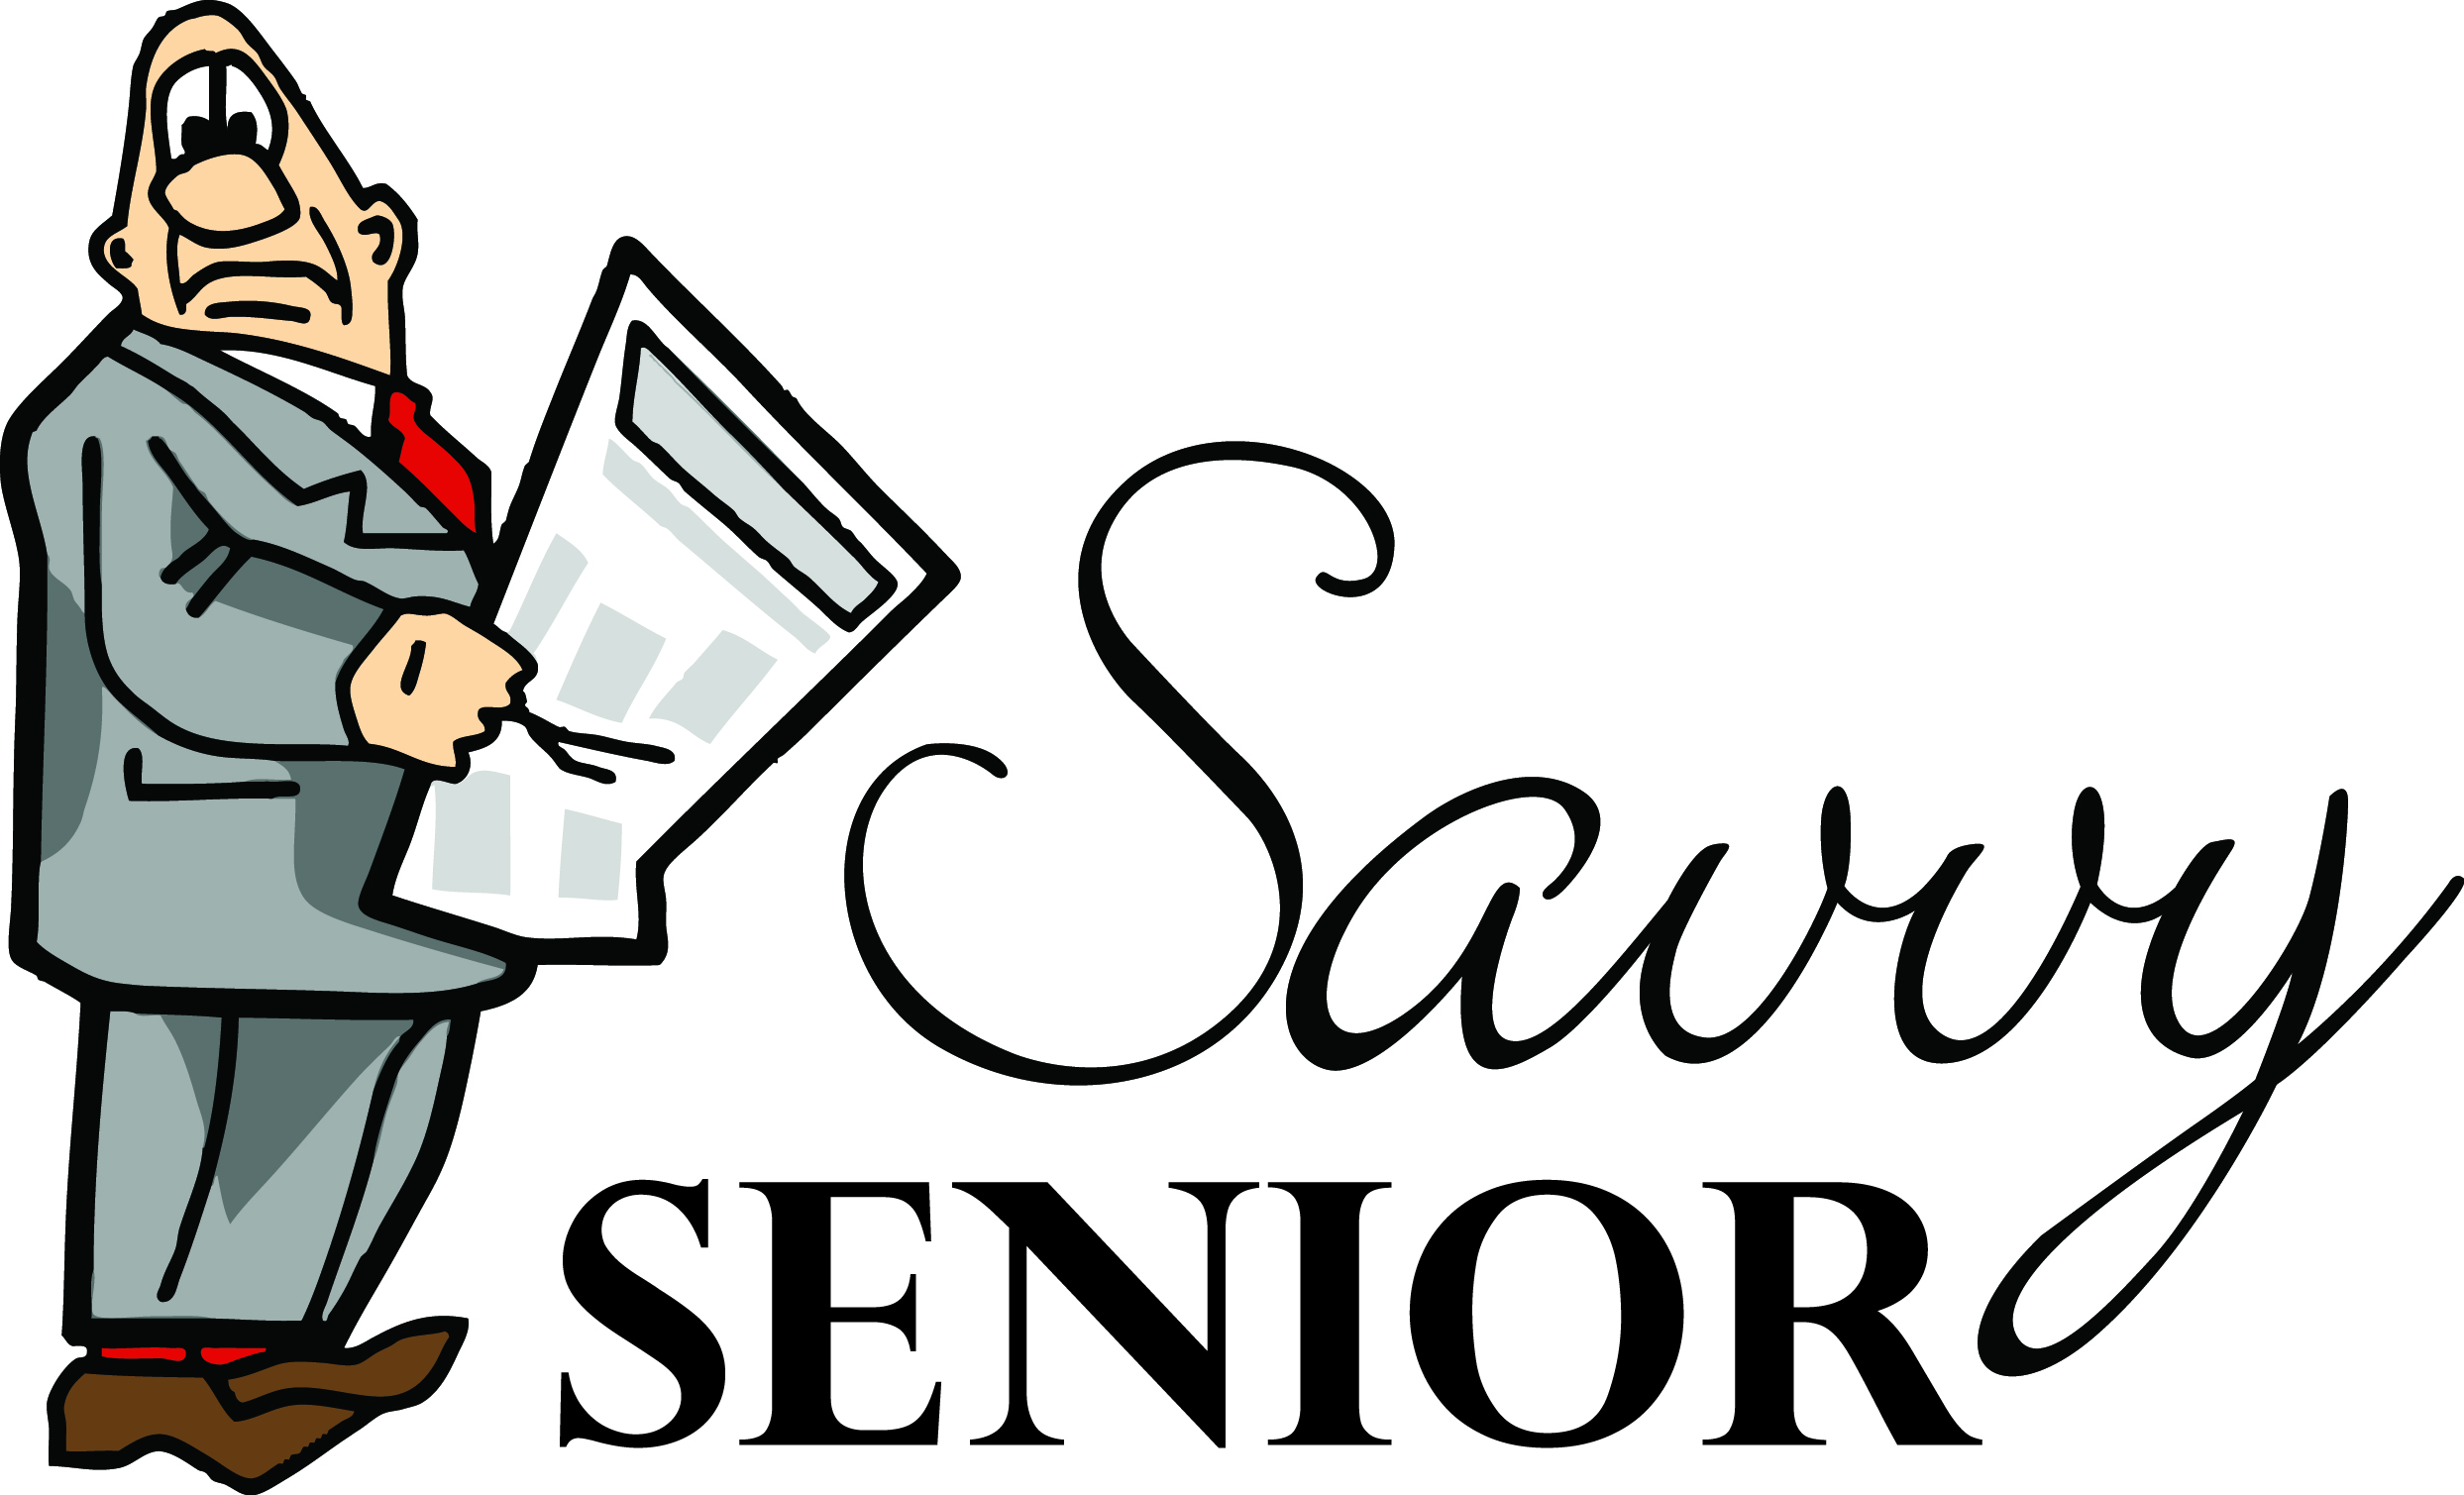 Savvy Senior: Auto aids that make driving easier and safer